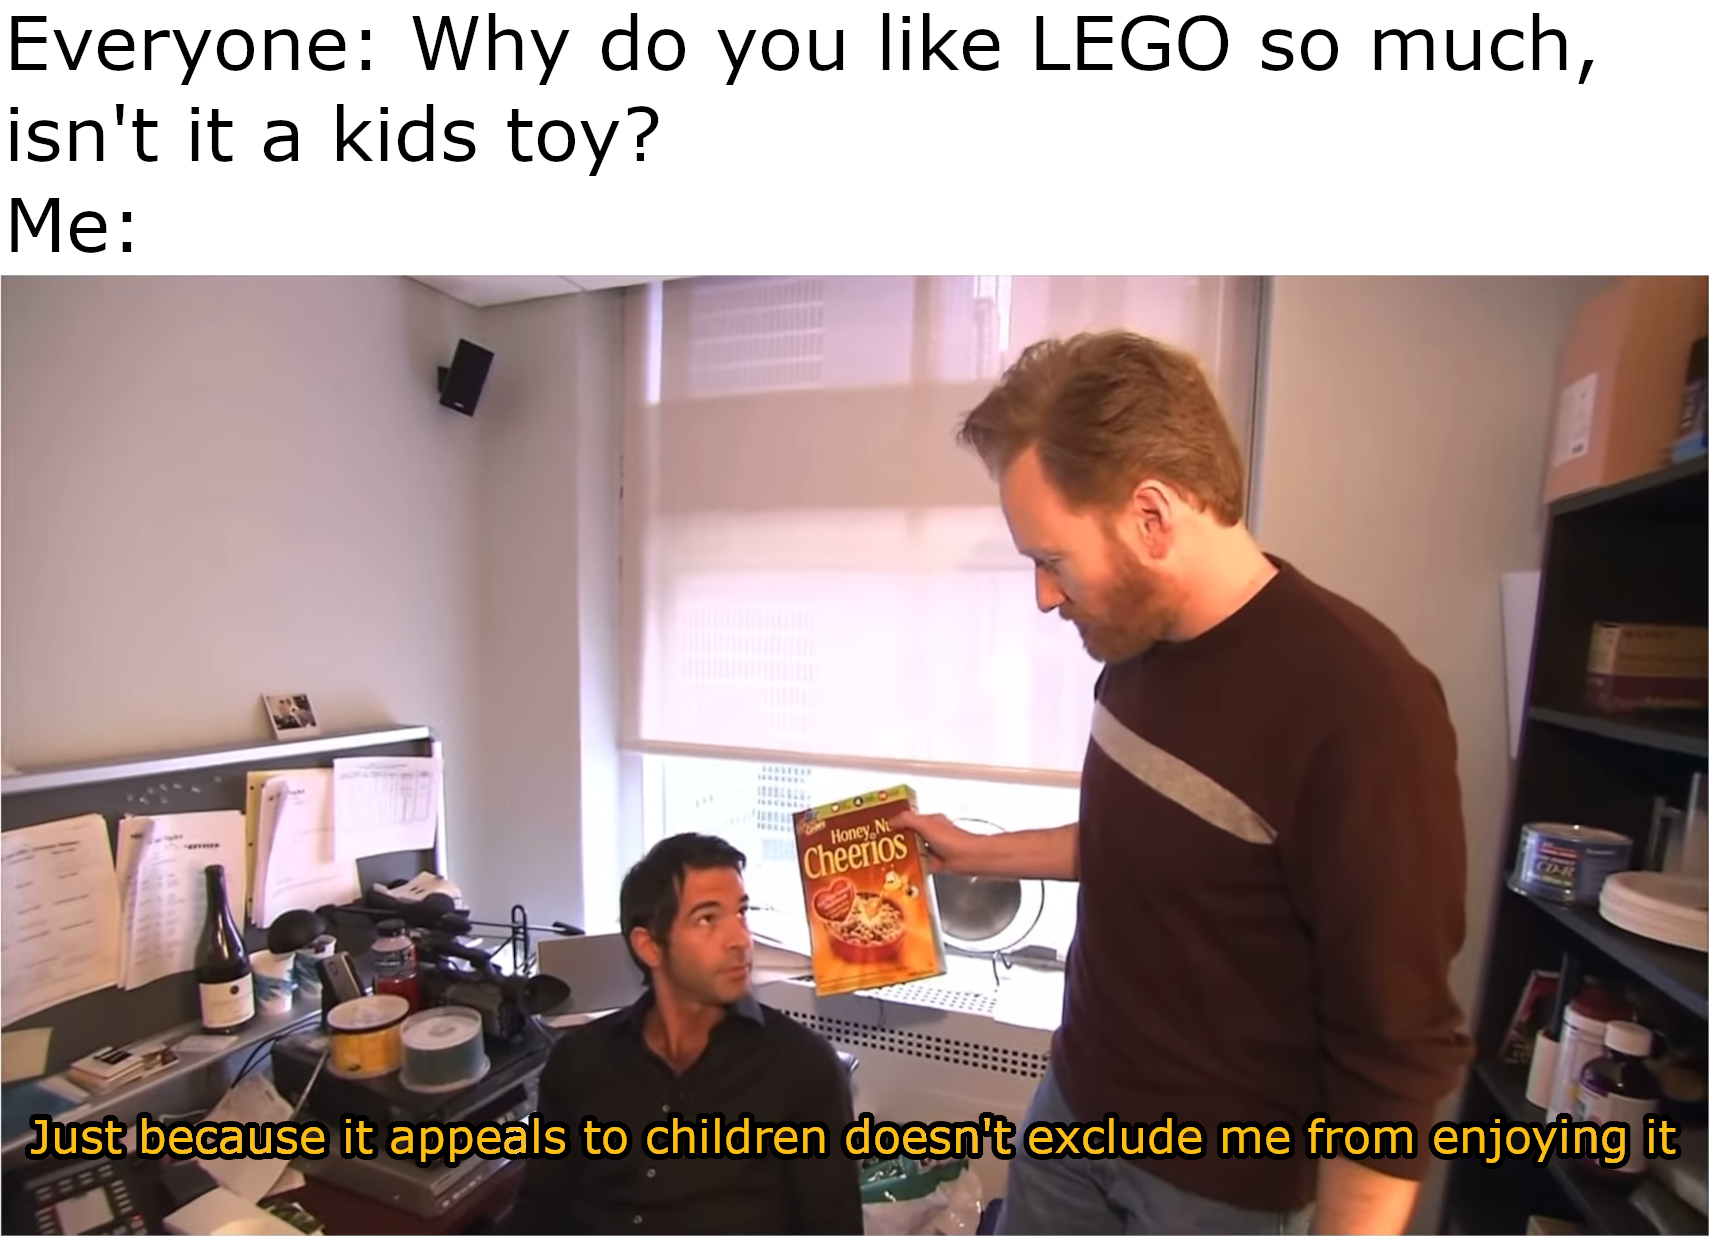 presentation - Everyone Why do you Lego so much, isn't it a kids toy? Me Cheerios 18" Just because it appeals to children doesn't exclude me from enjoying it